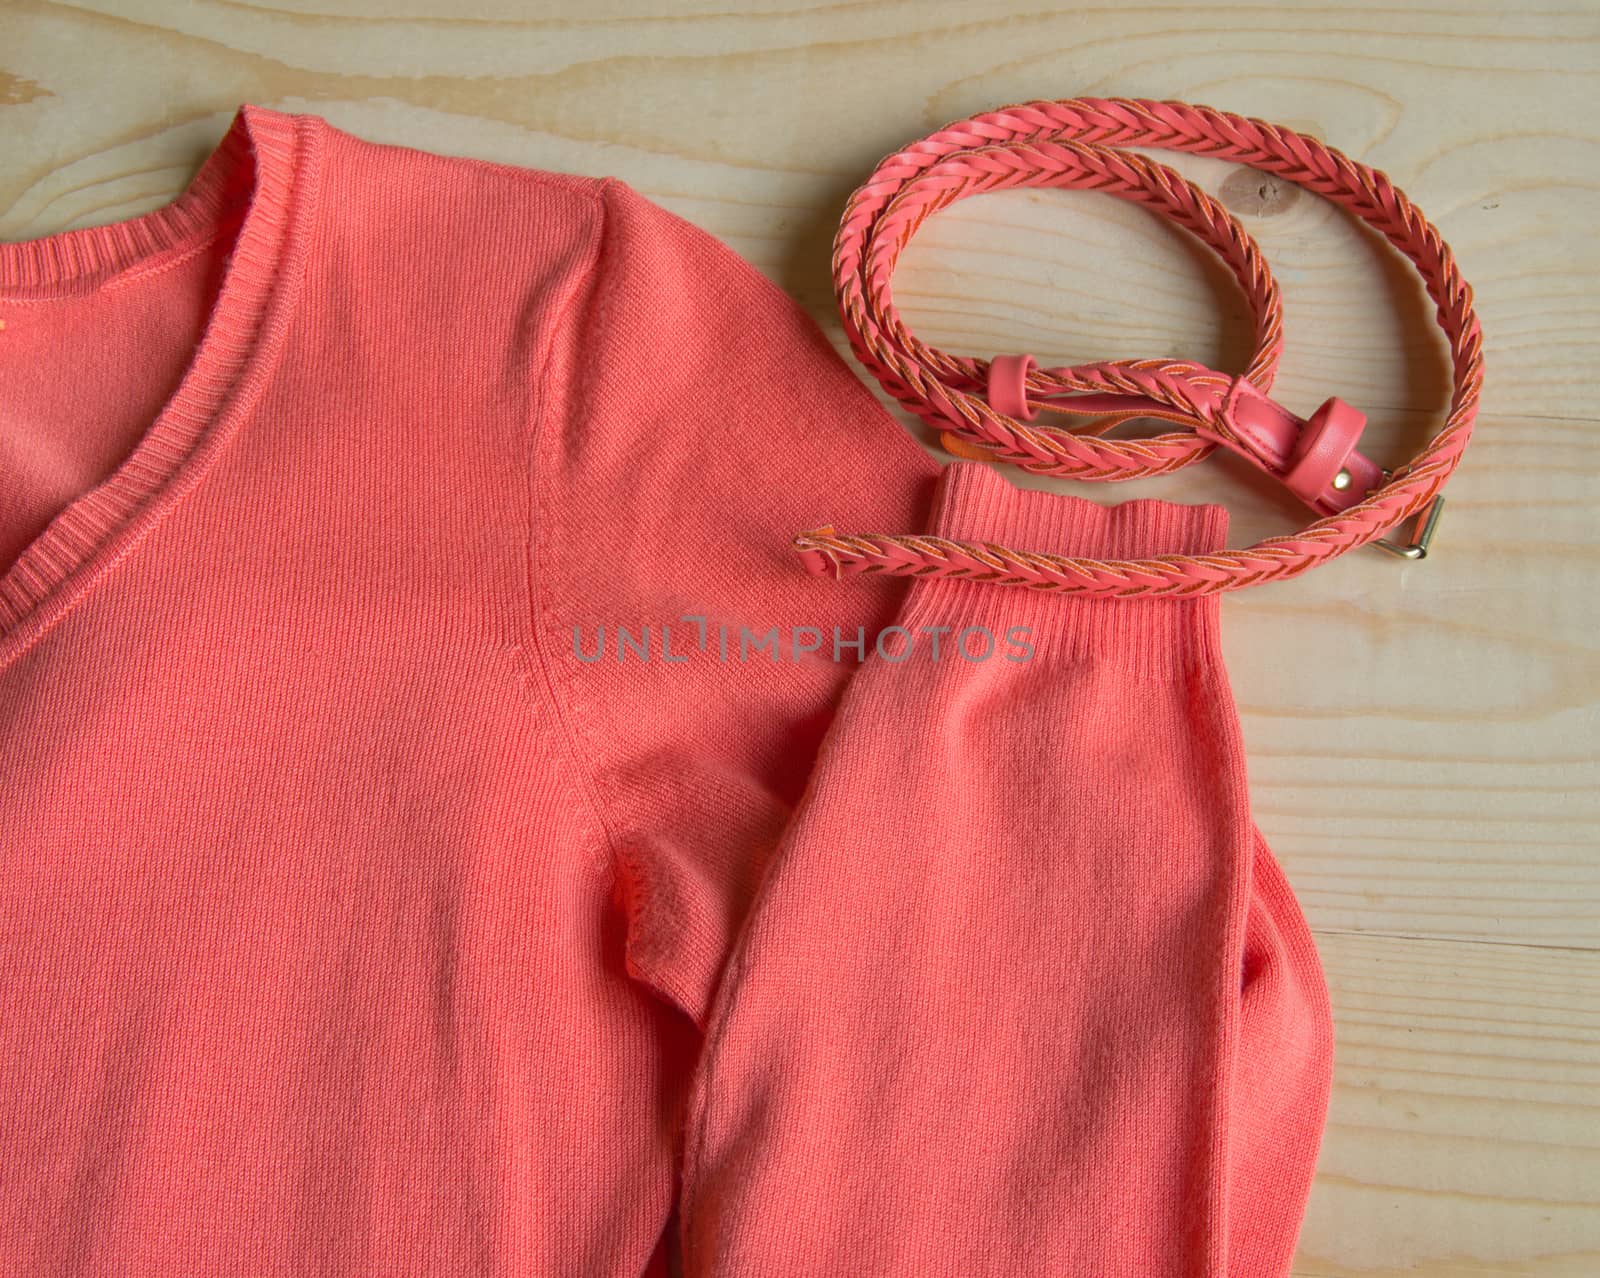 Women's fashion pink sweater with a belt on a light wooden background